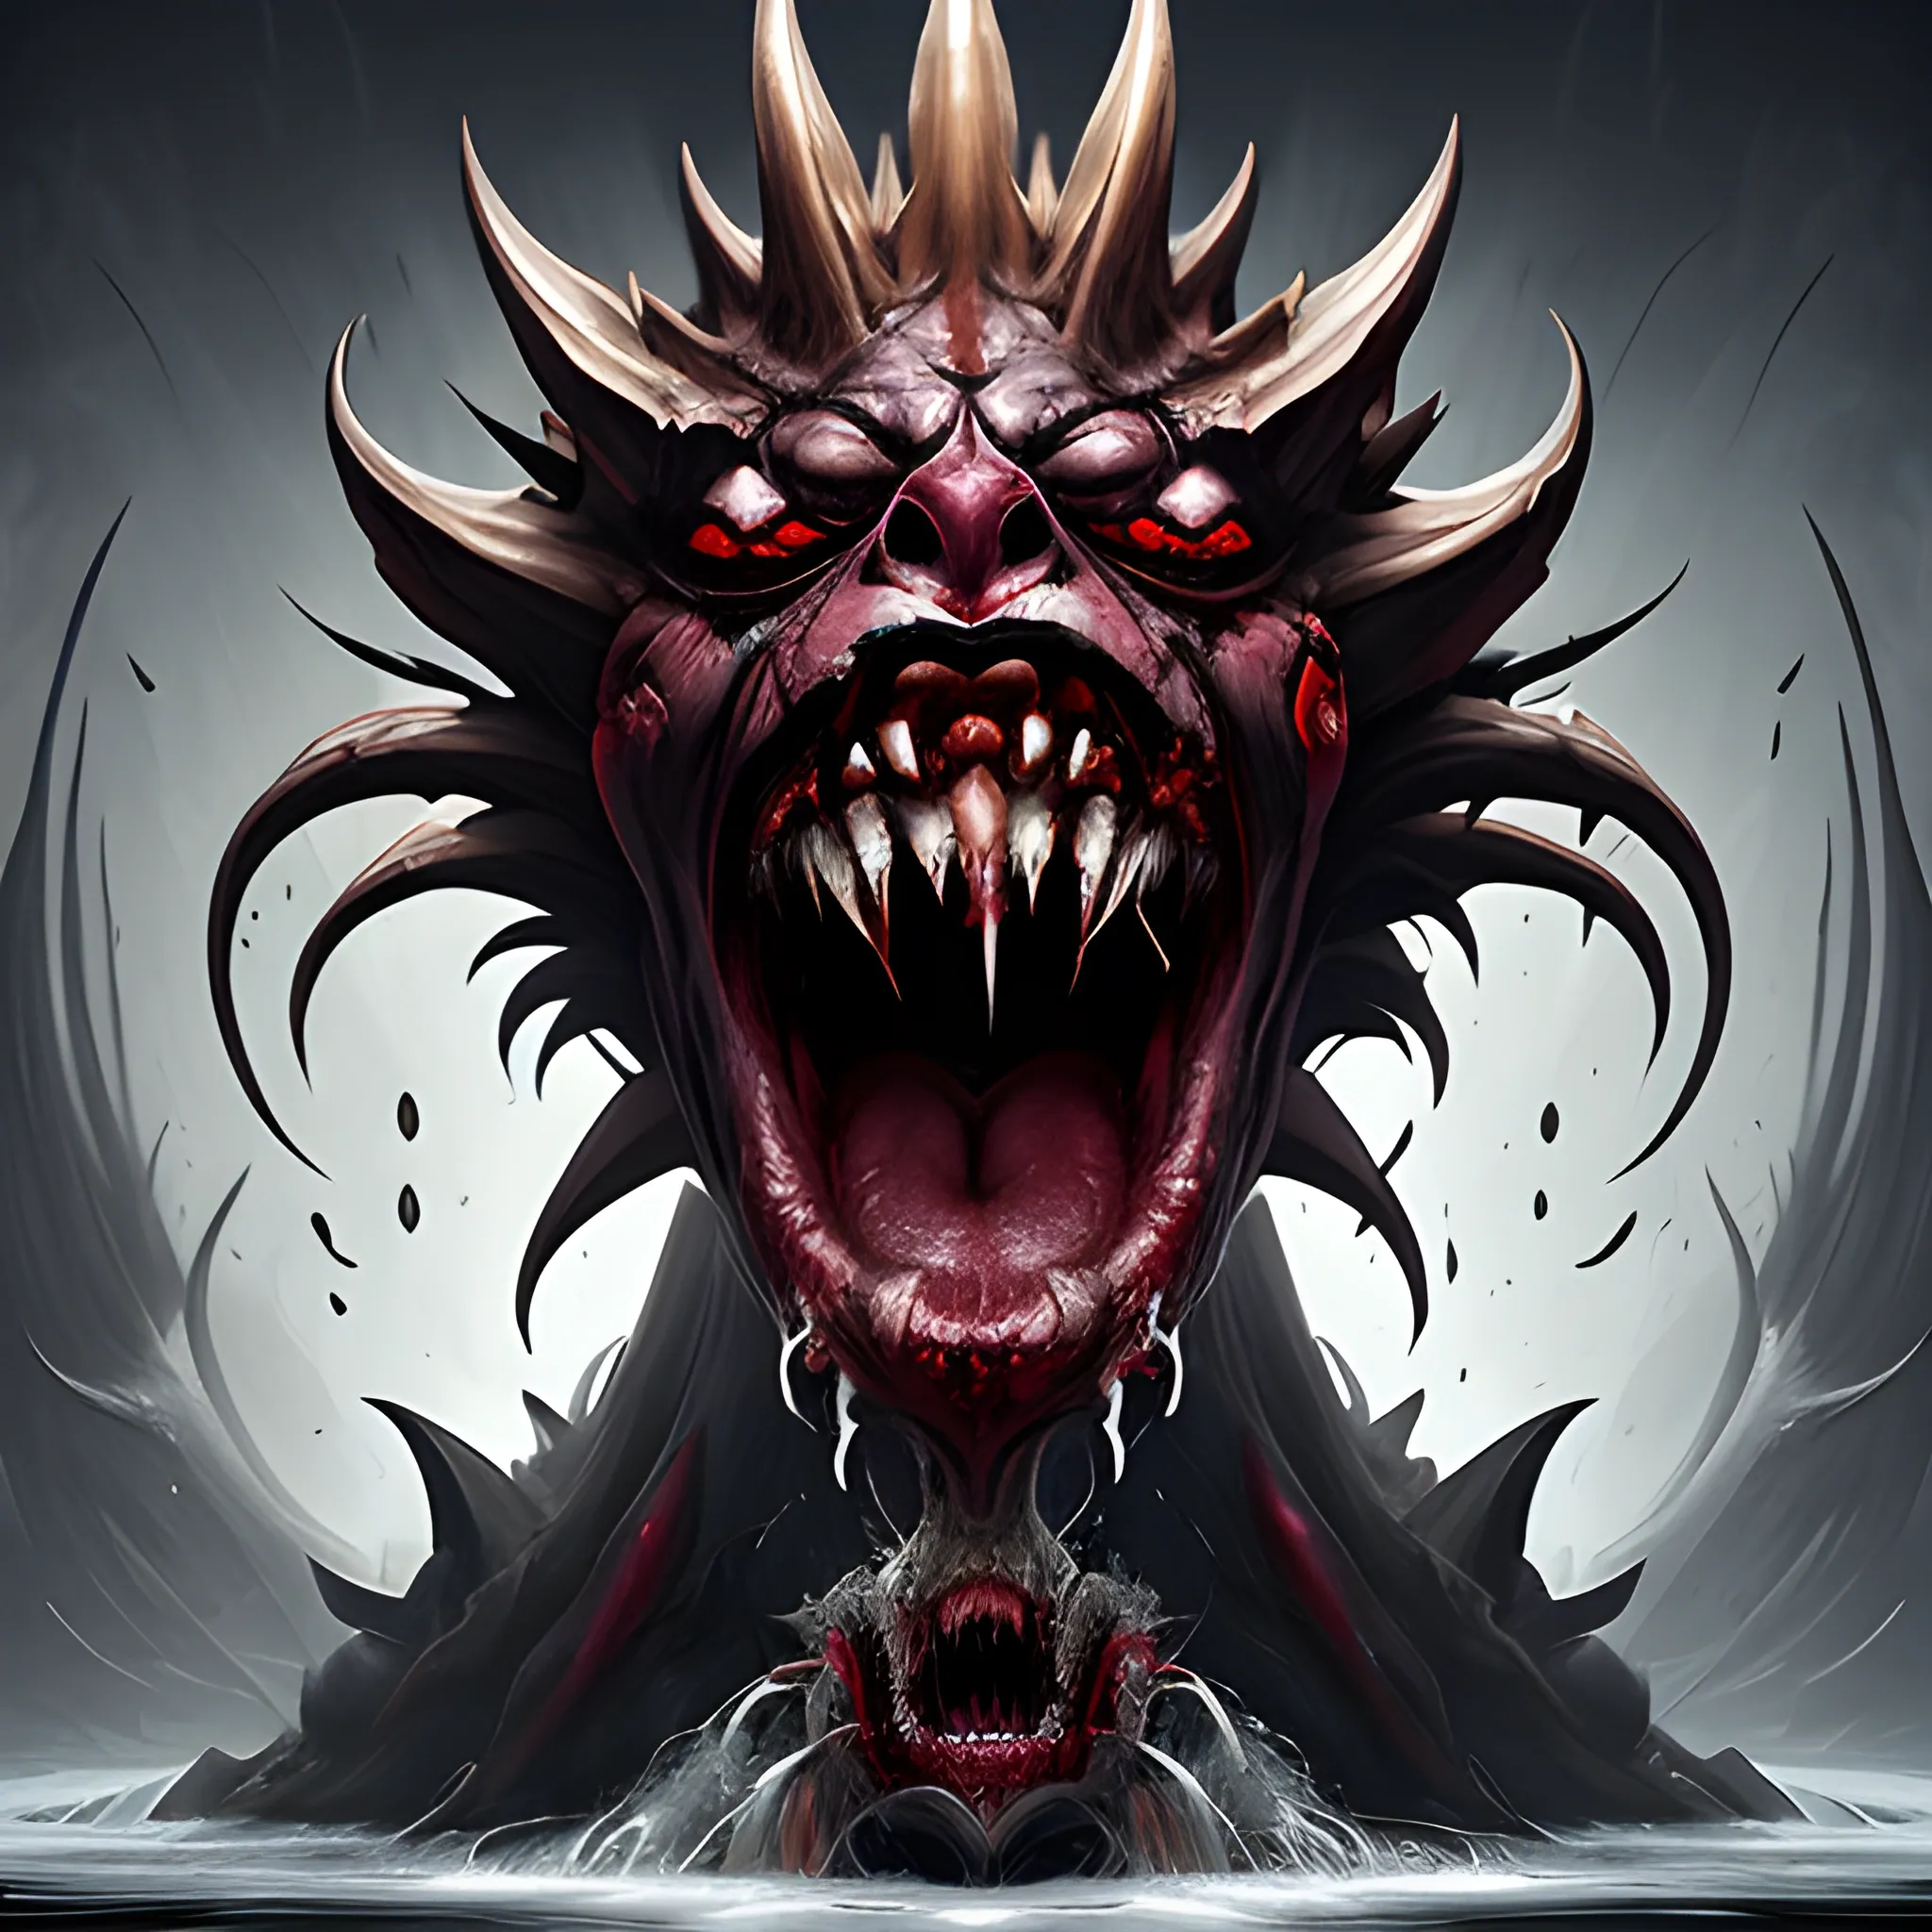 Splash art, a mouth opening to reveal rows of razor-sharp teeth as a screaming man is devoured whole by the vengeful poulp goddess, in the style of fantasy art.